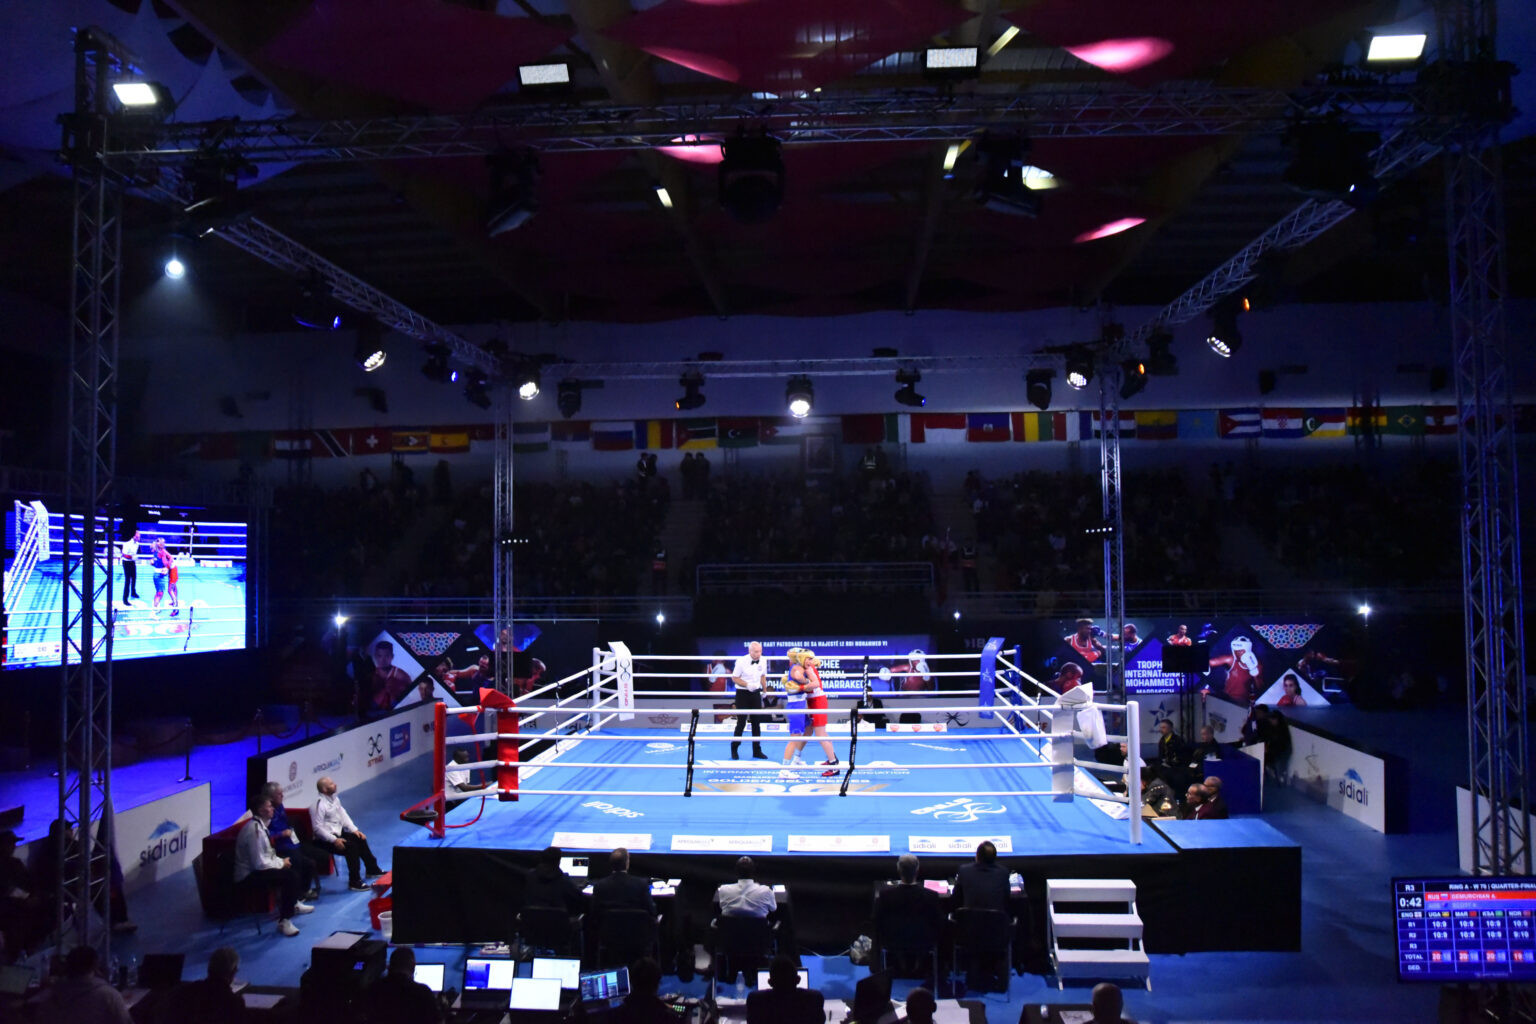 Kremlev expressed the desire for Japan to host the IBA World Boxing Championships in the future. © IBA